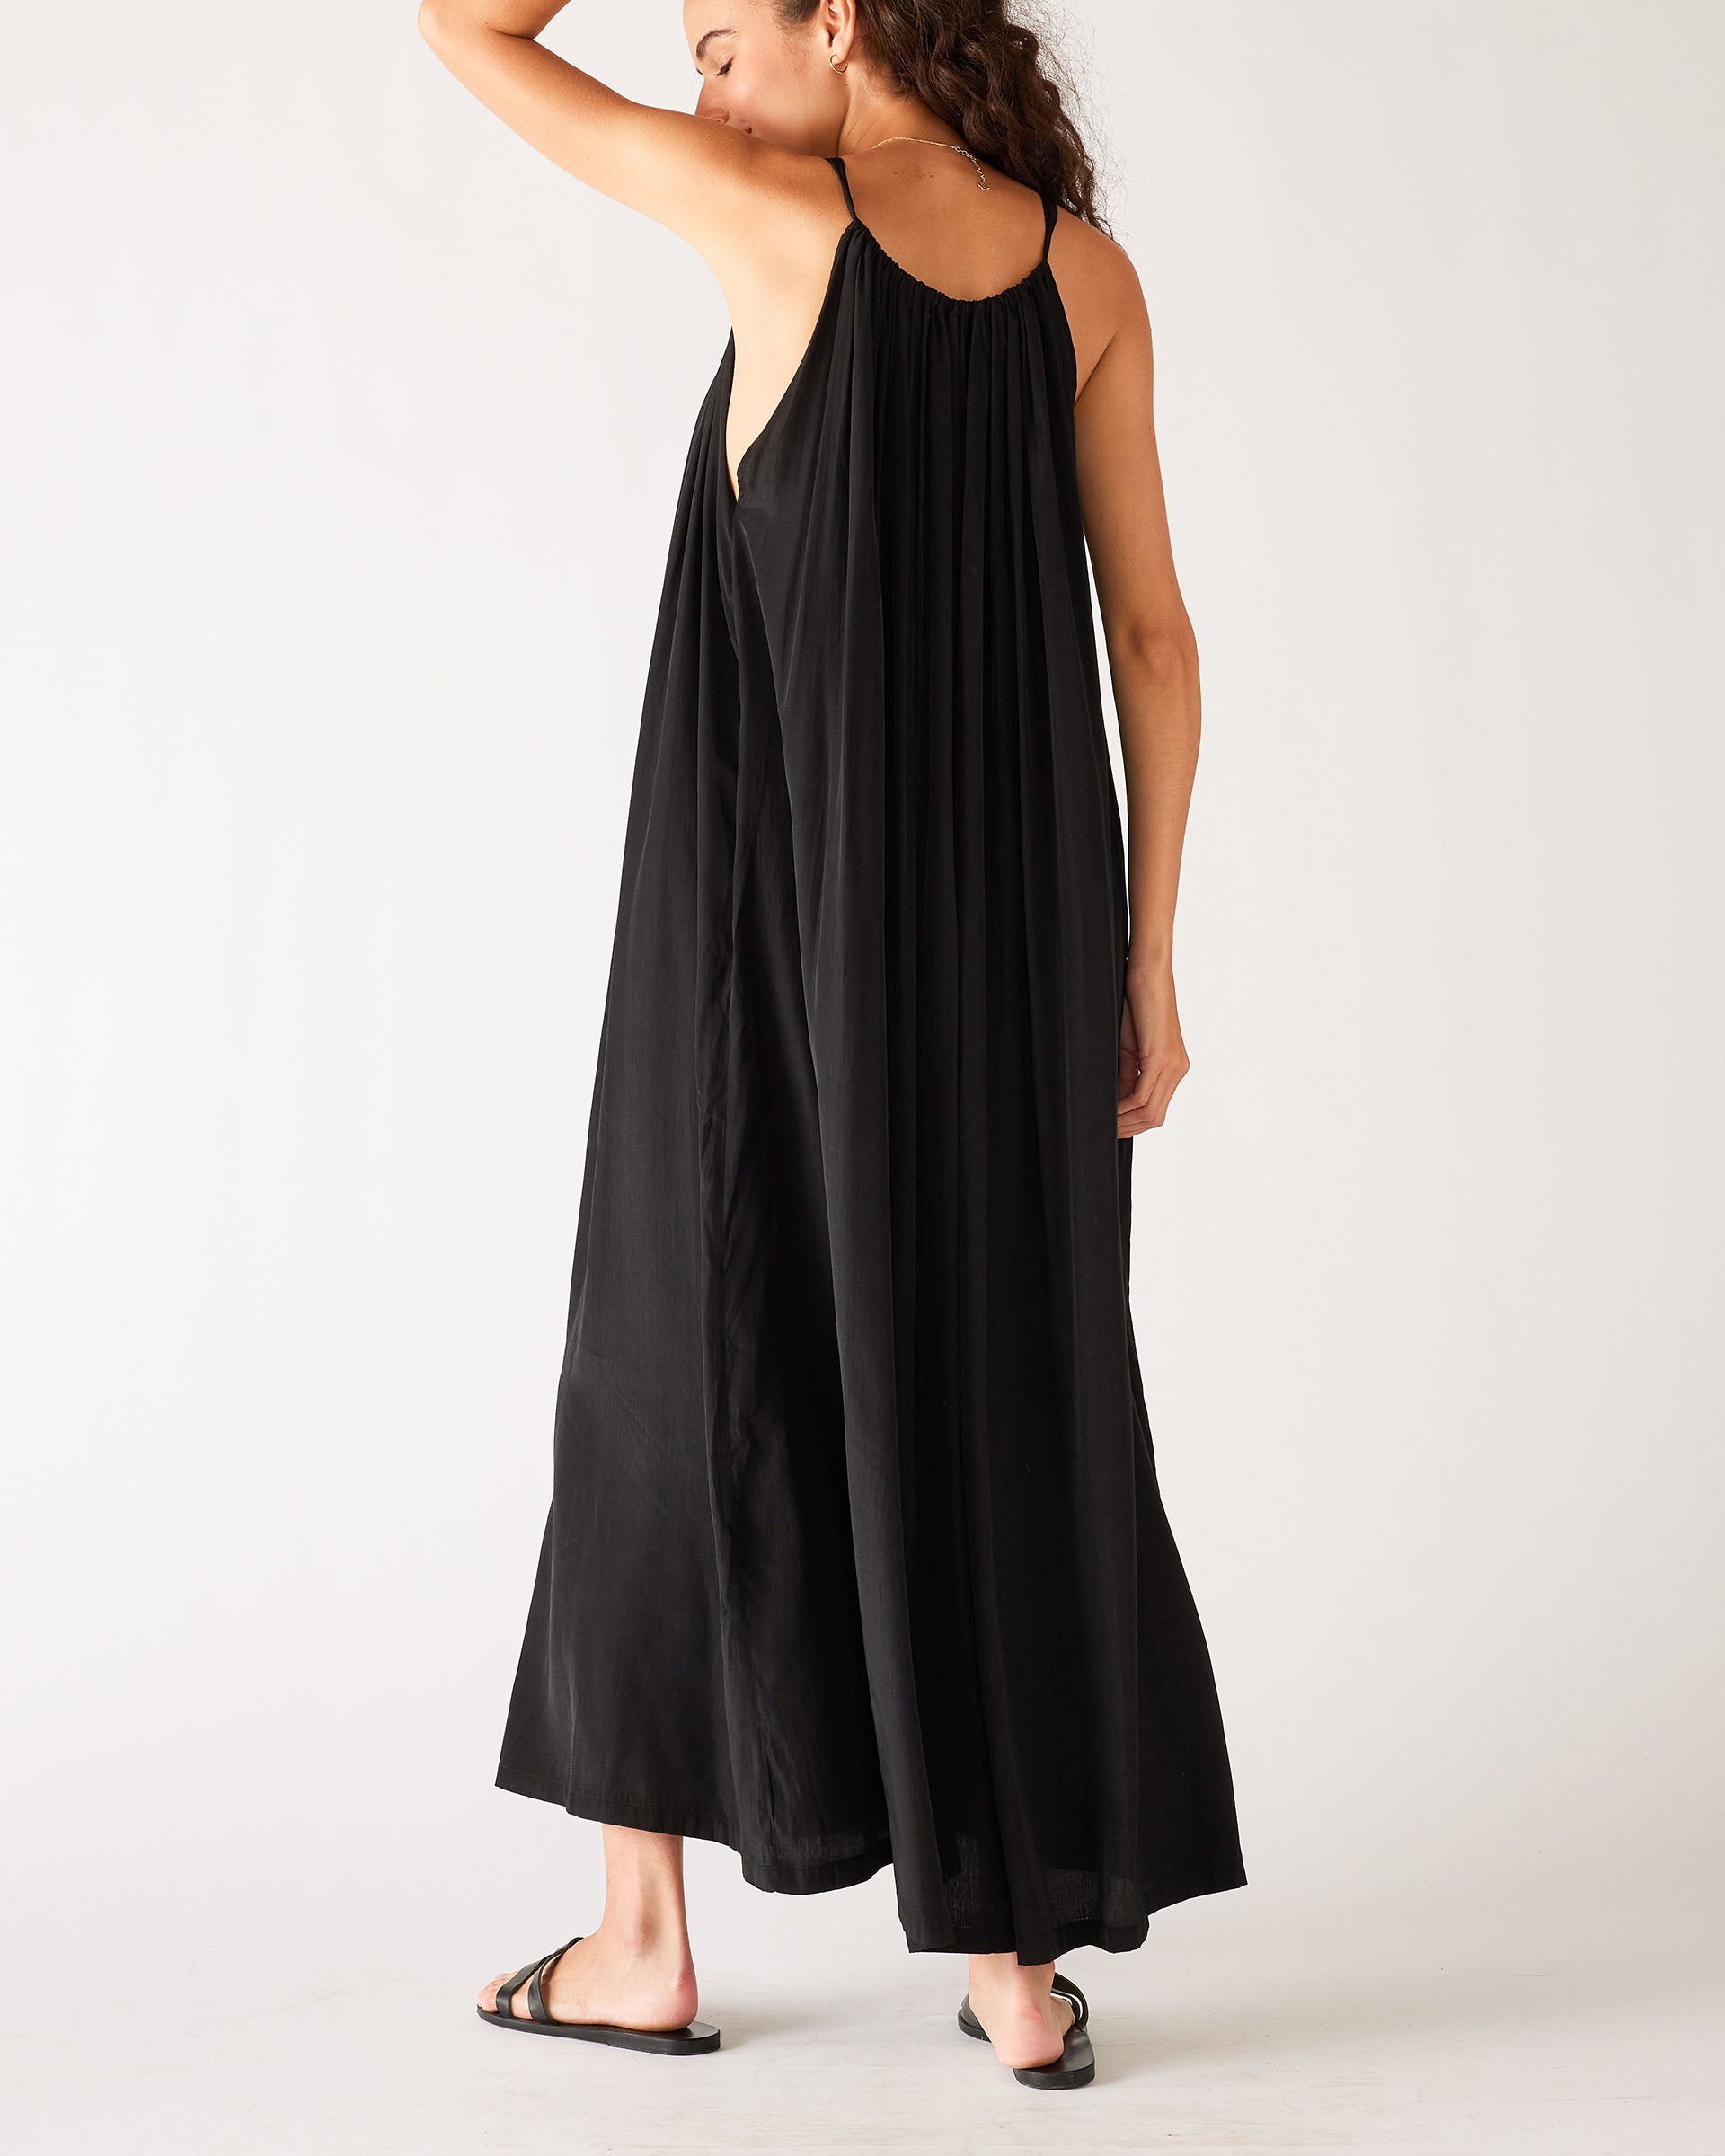 Women's Black Loose Fit Pullover Maxi Dress Rear View